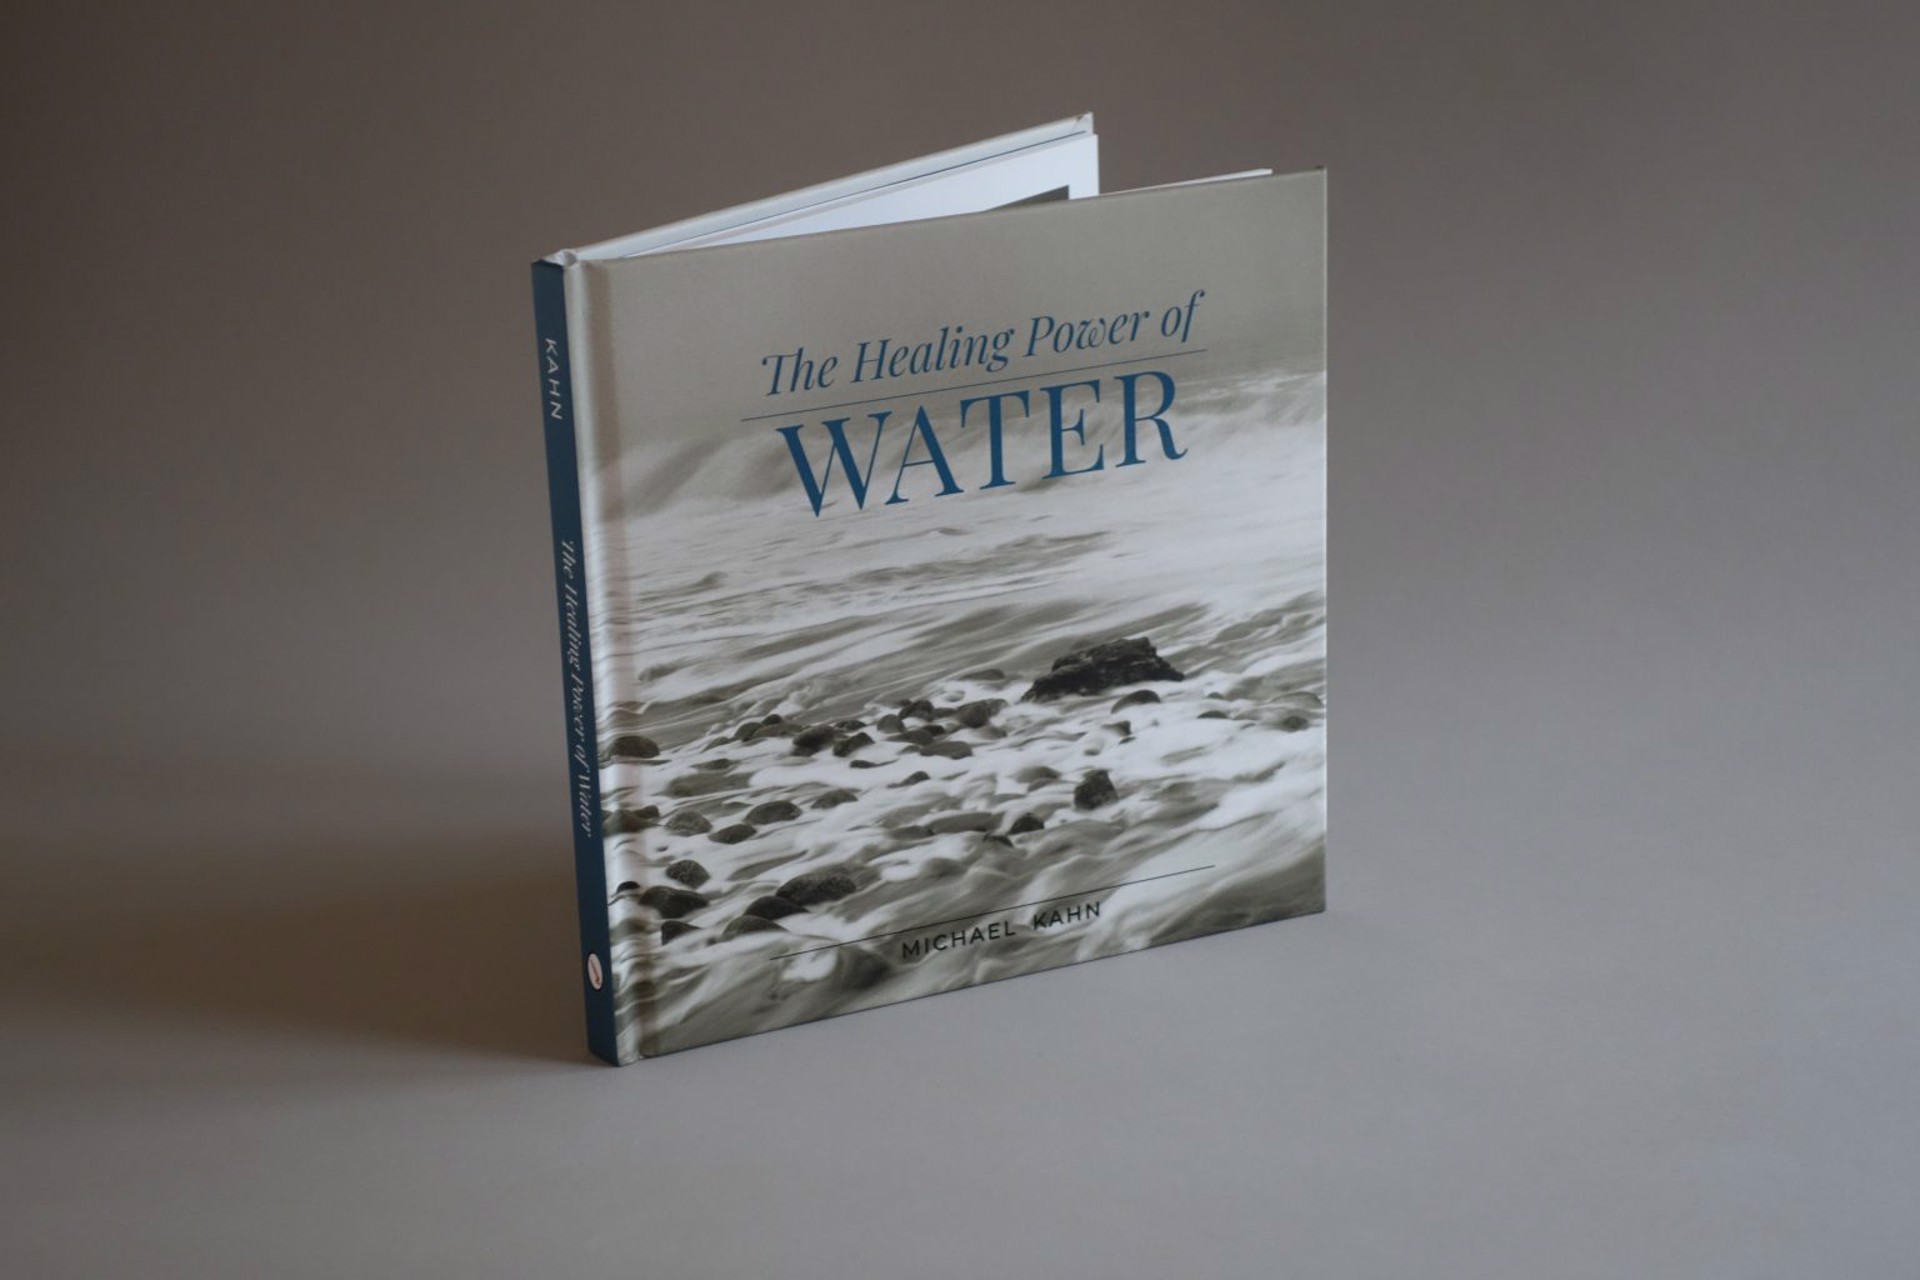 The Healing Power of Water by Michael Kahn